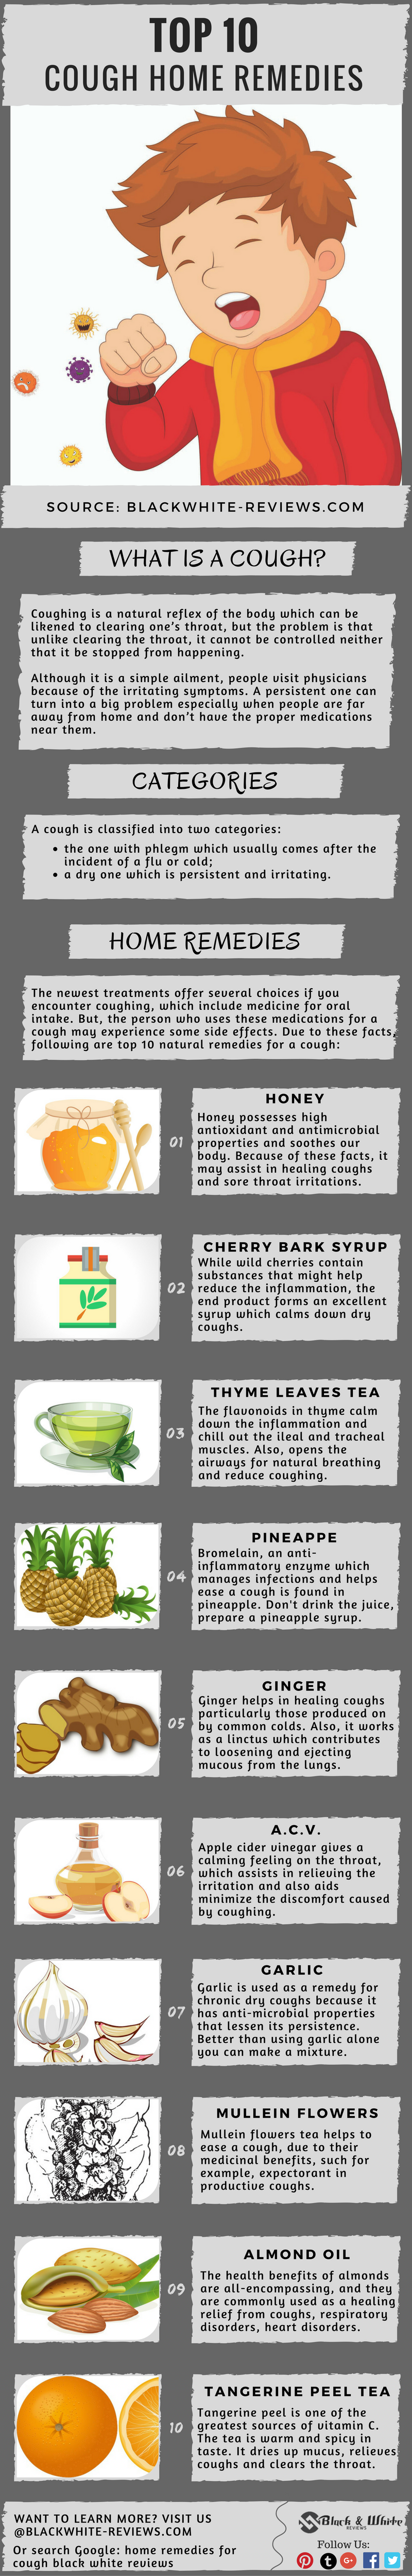 top 10 cough remedies - infographic